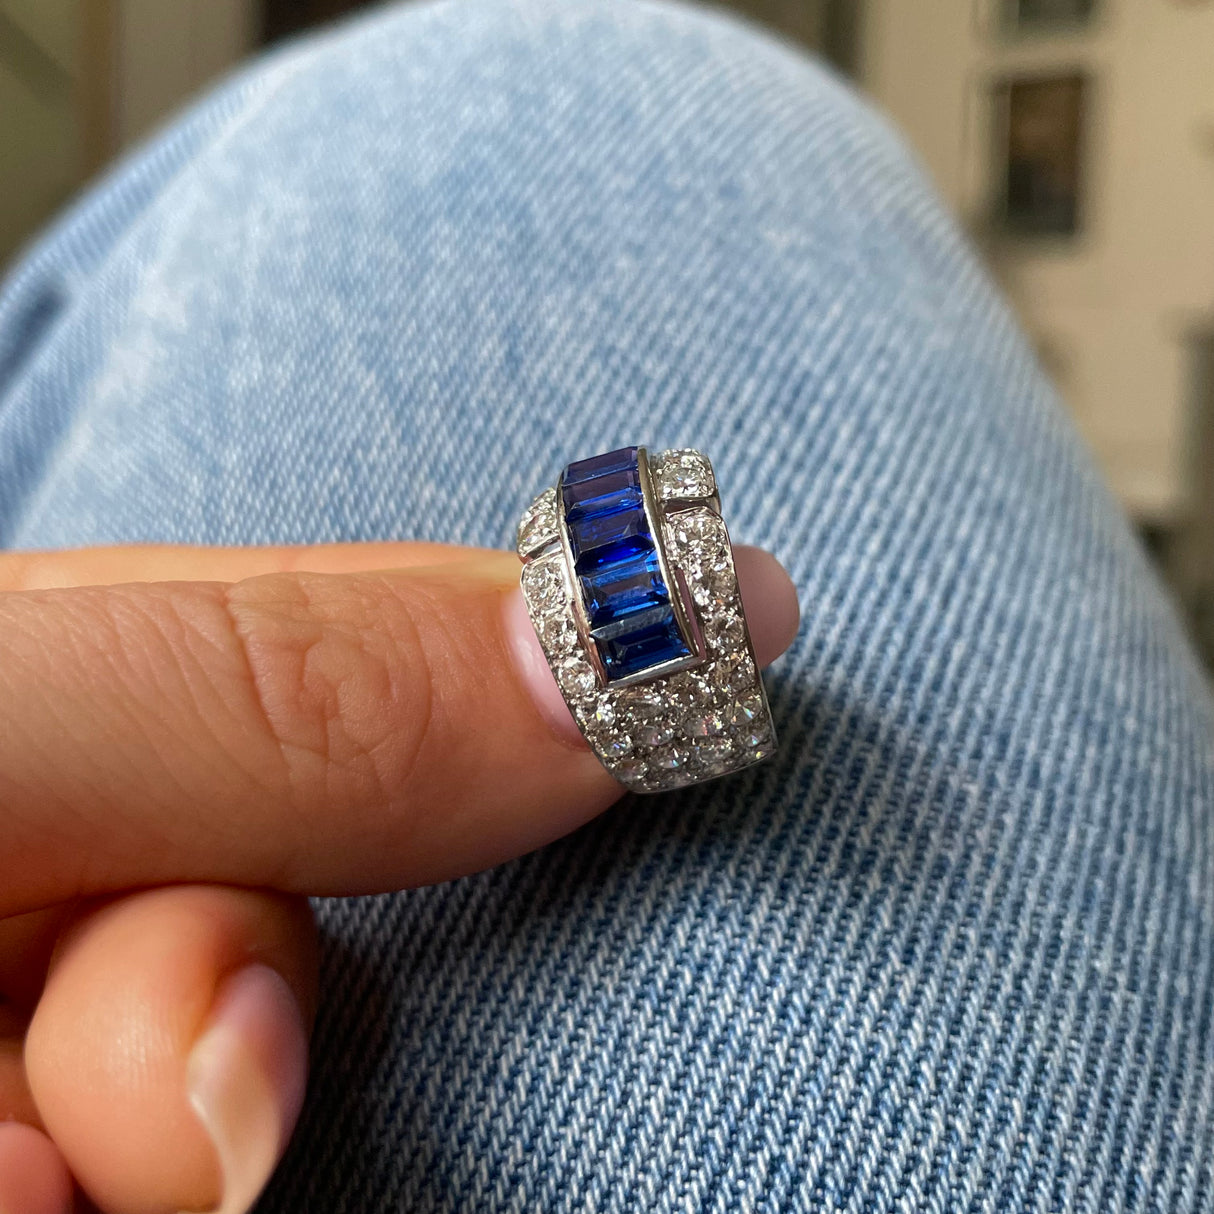 Sapphire and diamond Art Deco Band, held in fingers placed on denim jeans. 